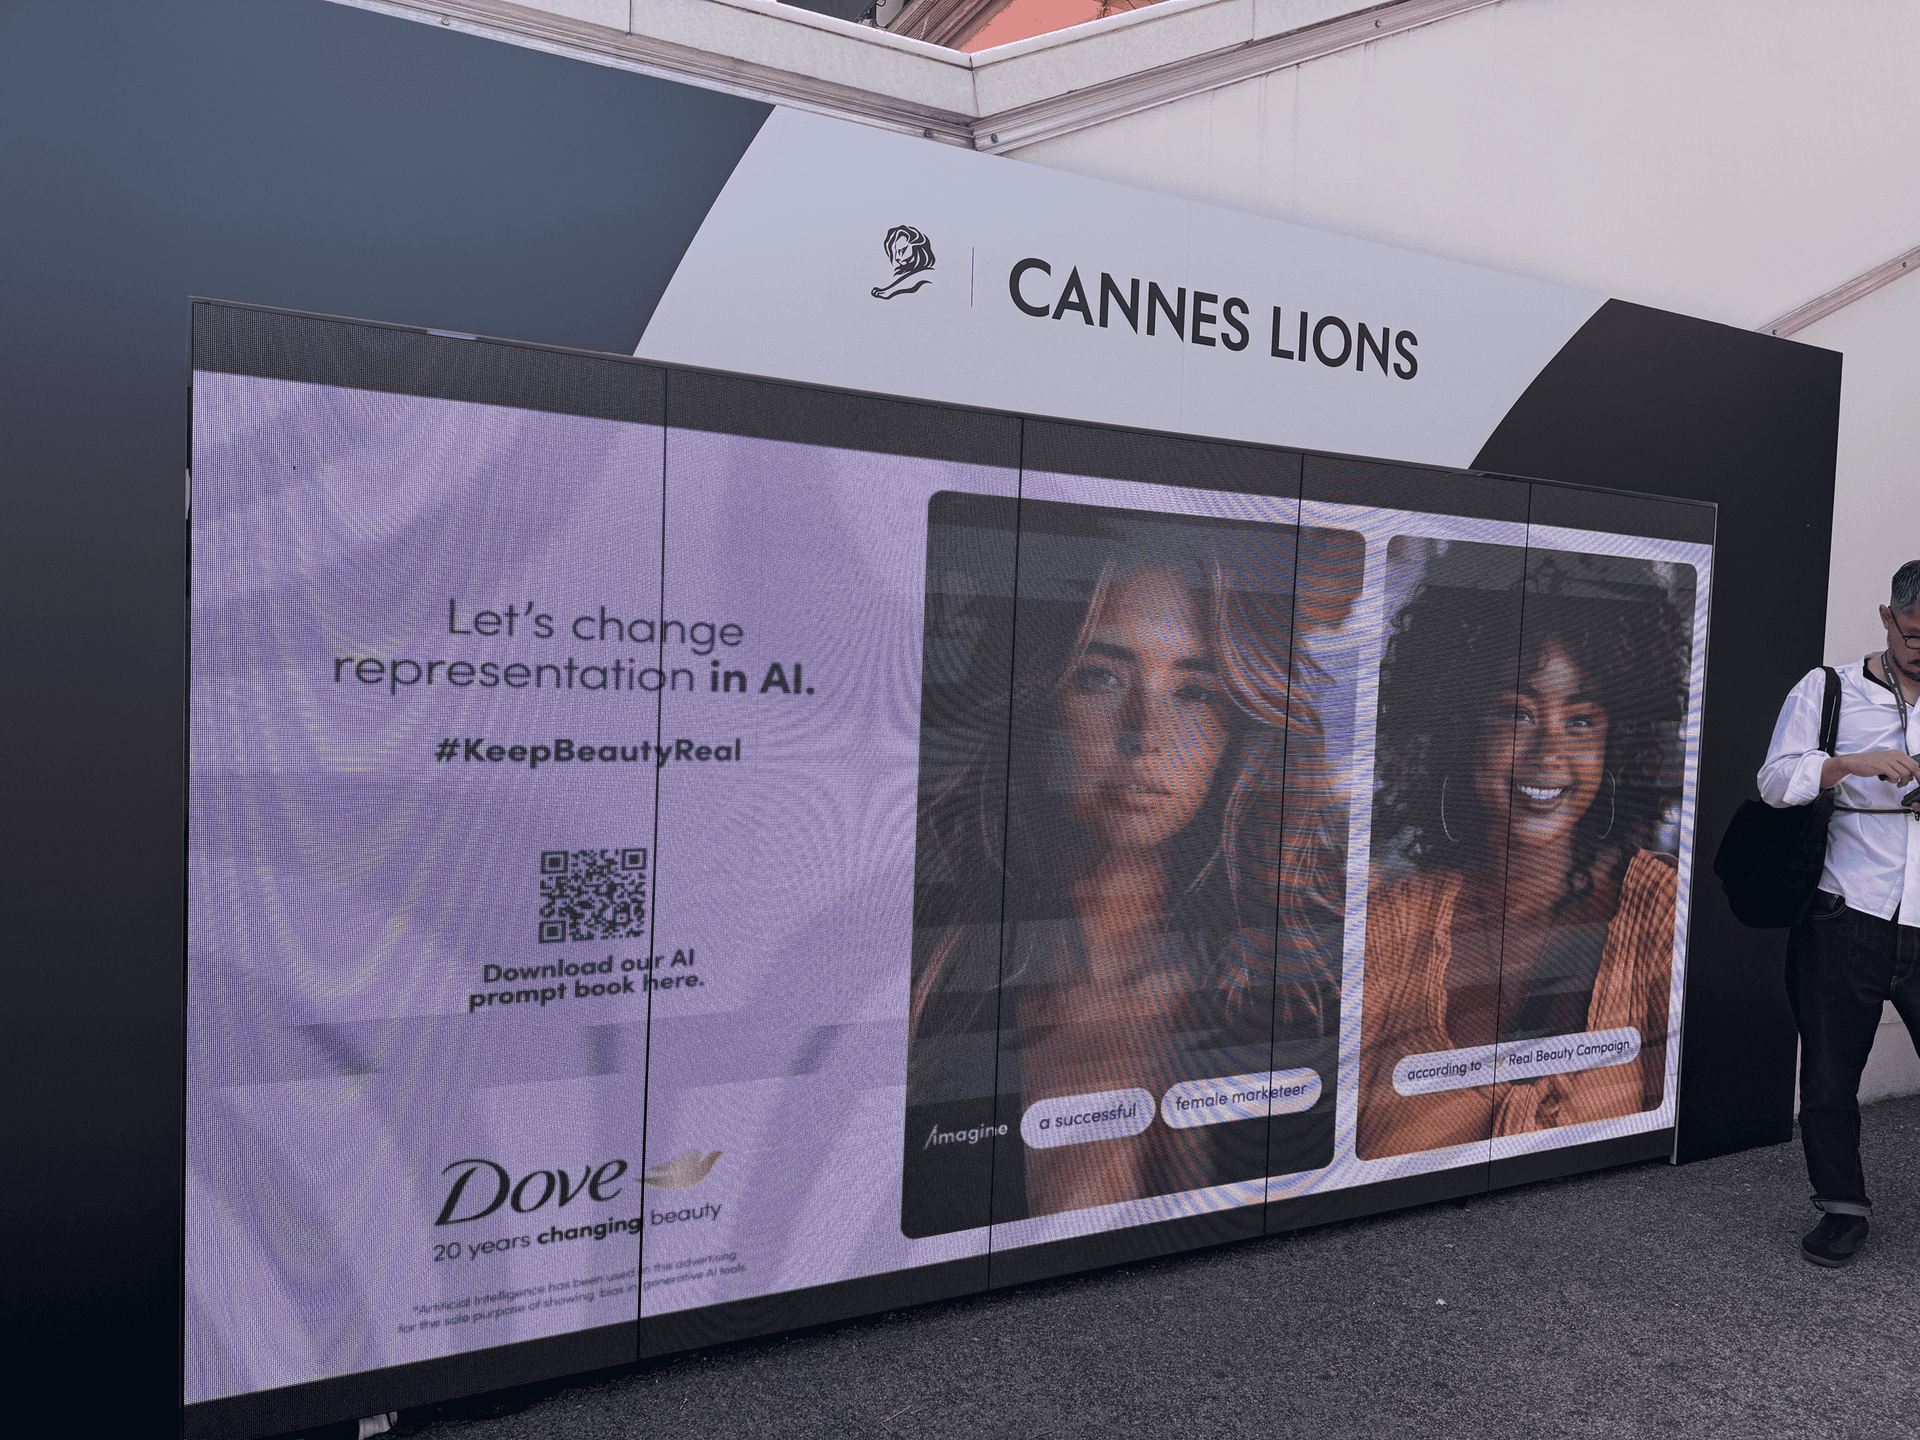 Large screen with a Cannes Lions logo shows a Dove ad with the words "Let's change representation in AI."